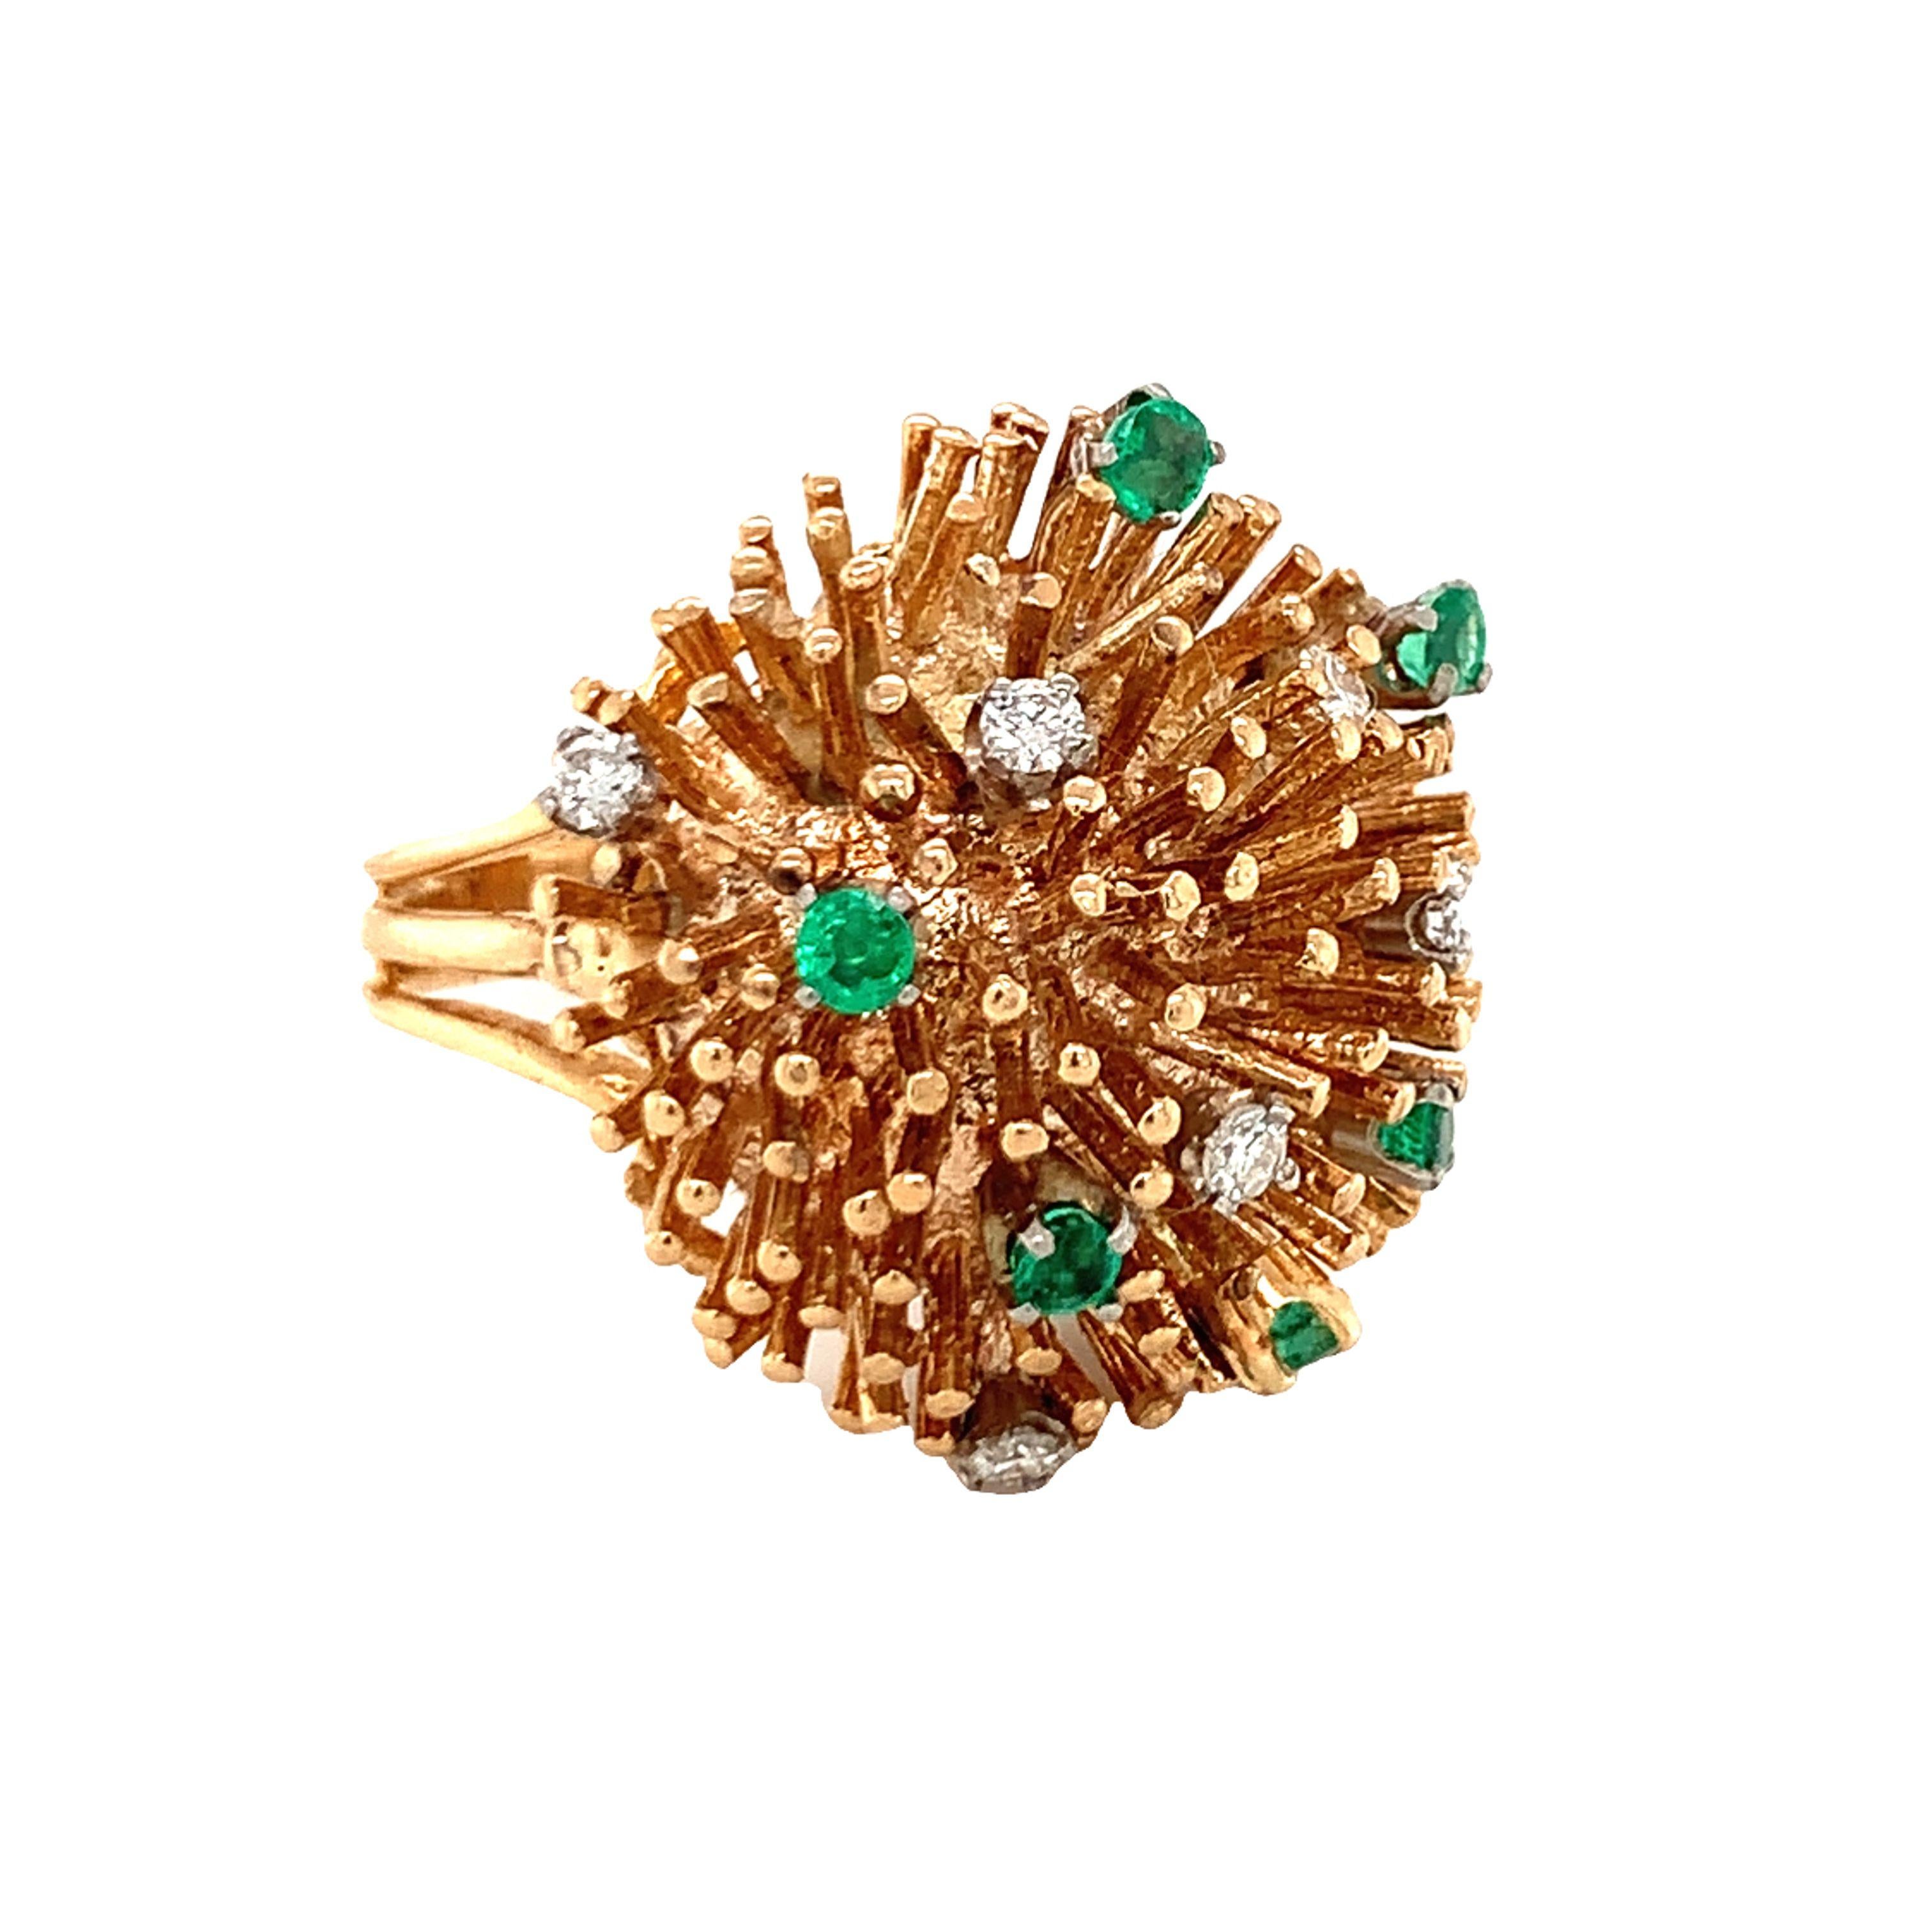 One diamond and emerald starburst design 14K yellow gold ring featuring six round brilliant cut diamonds weighing 0.40 ct. with G color and VS-1 clarity. Accented by six round brilliant cut emeralds weighing 0.50 ct. Circa 1970s.

Flash, pointed,